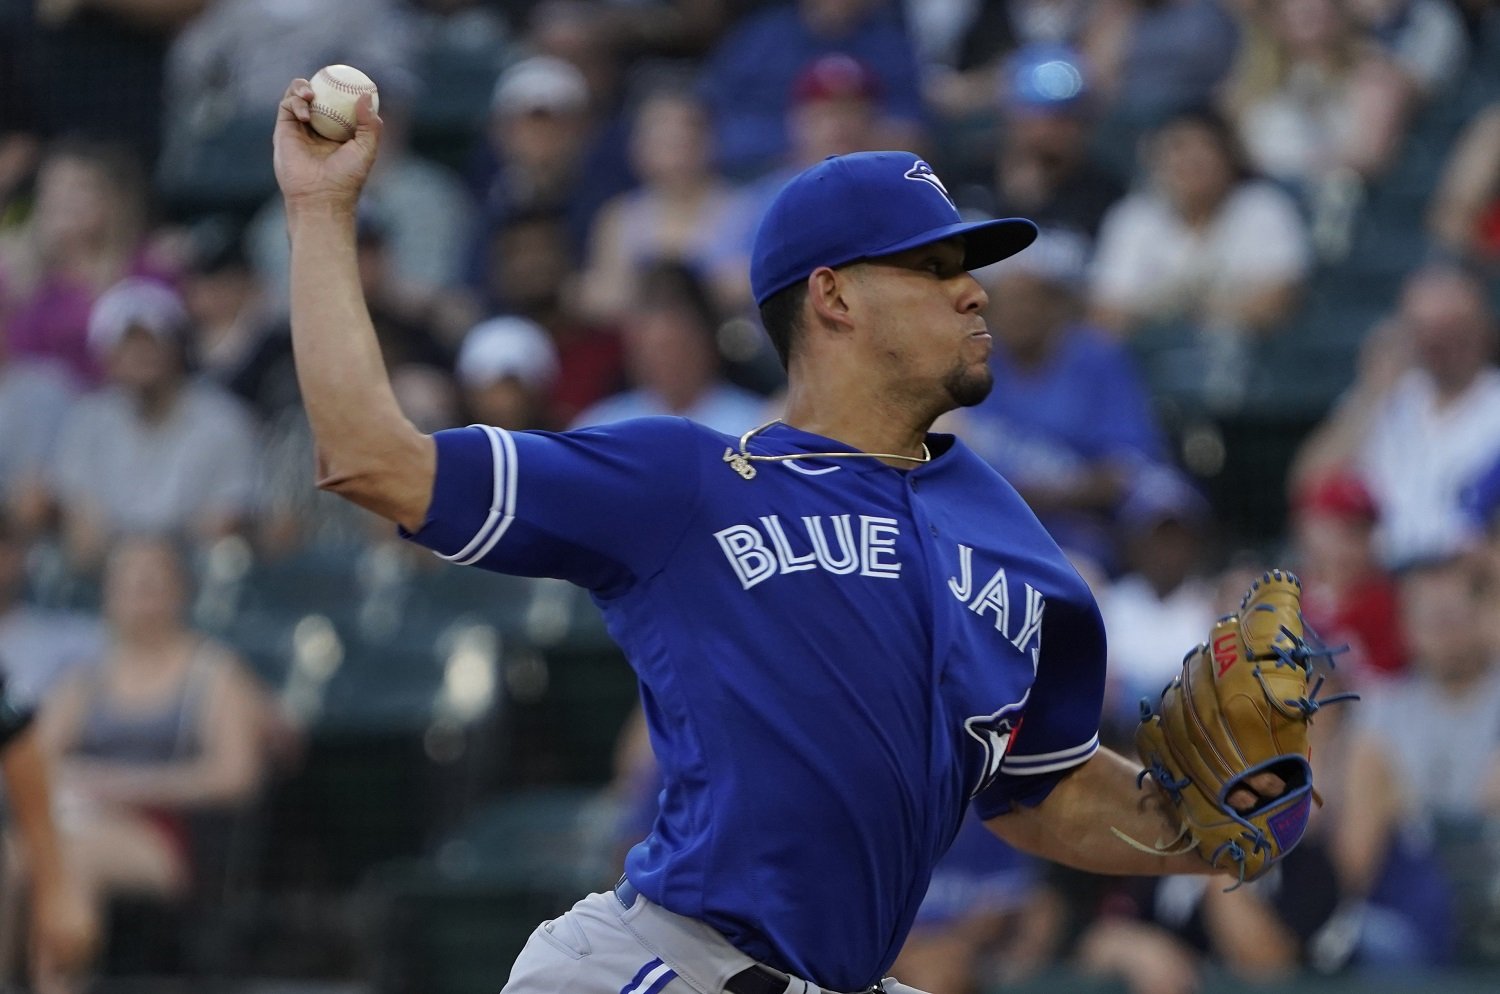 Blue Jays sign Berrios to 7-year extension worth reported $131M